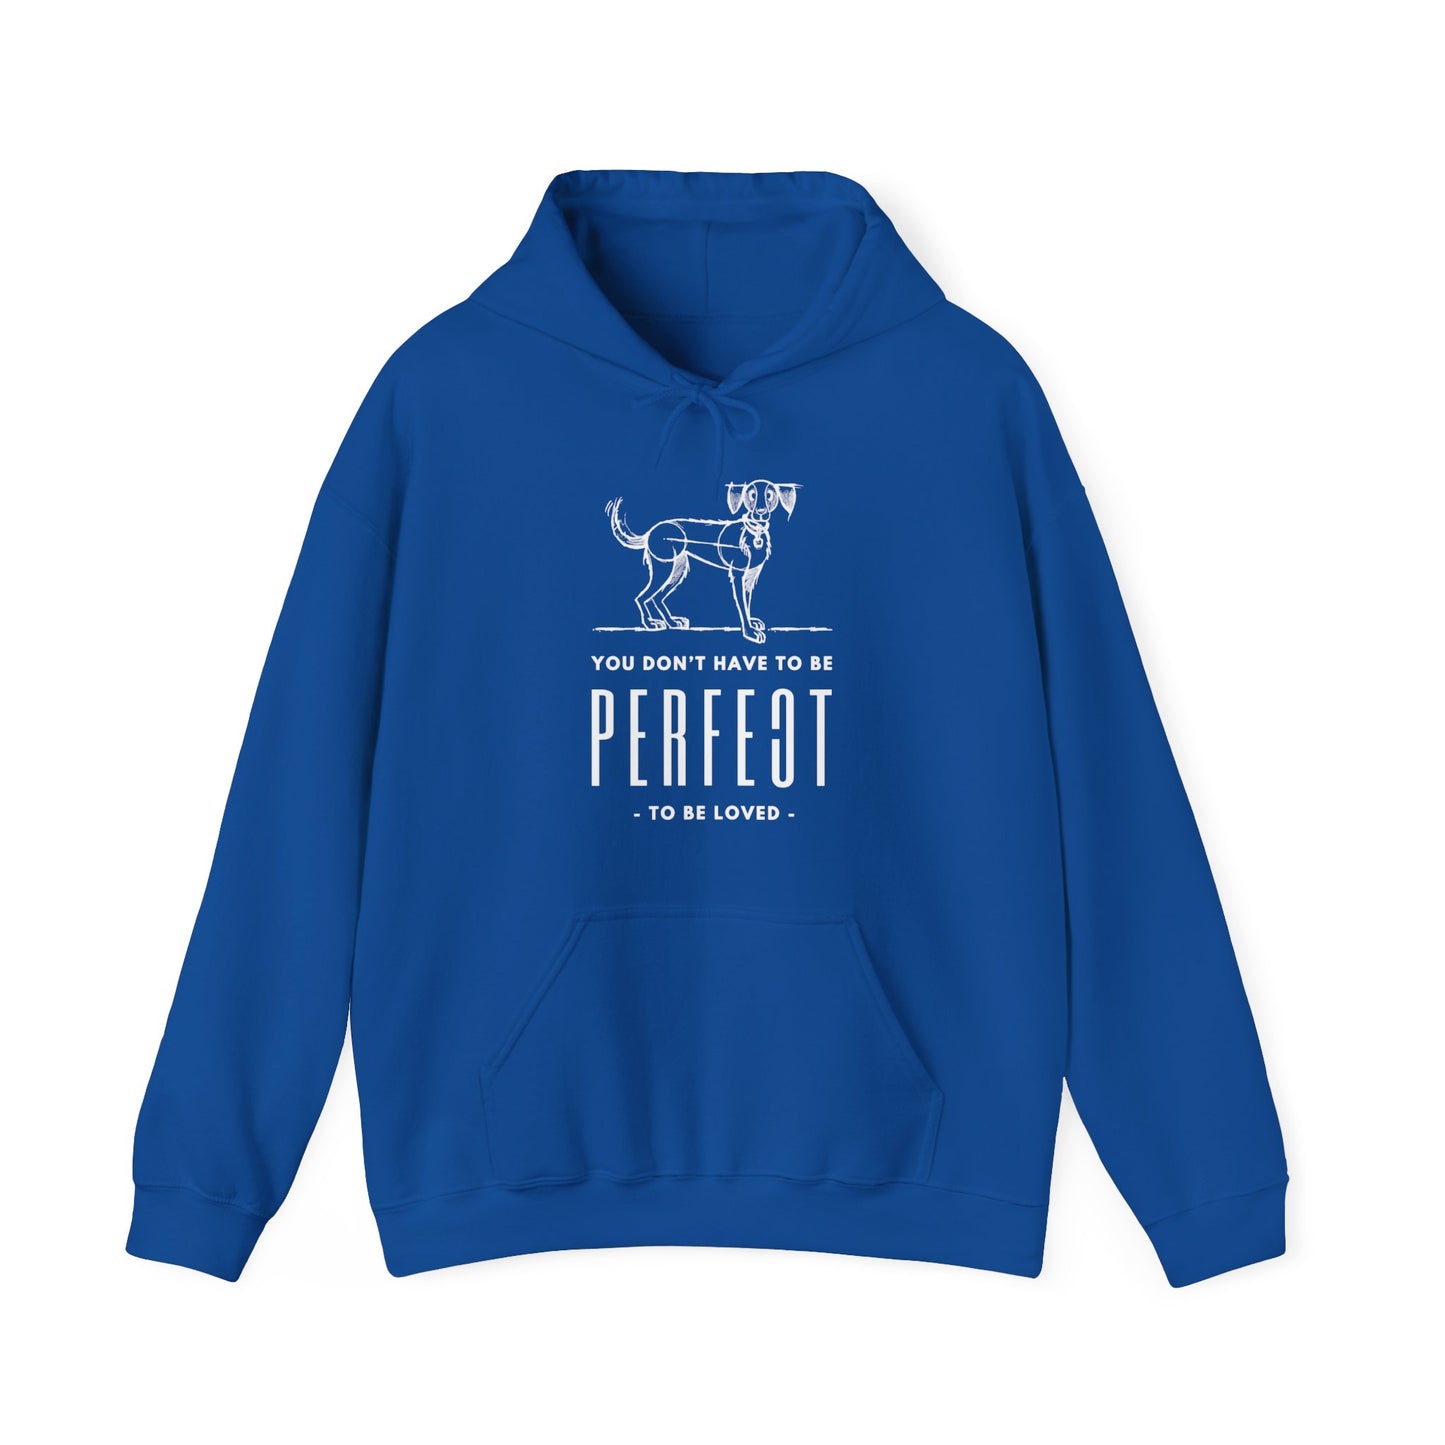 Against a white backdrop, Dogs Pure Love presents a royal blue unisex hoodie featuring a dog sketch and the phrase 'You don't have to be perfect to be loved.'